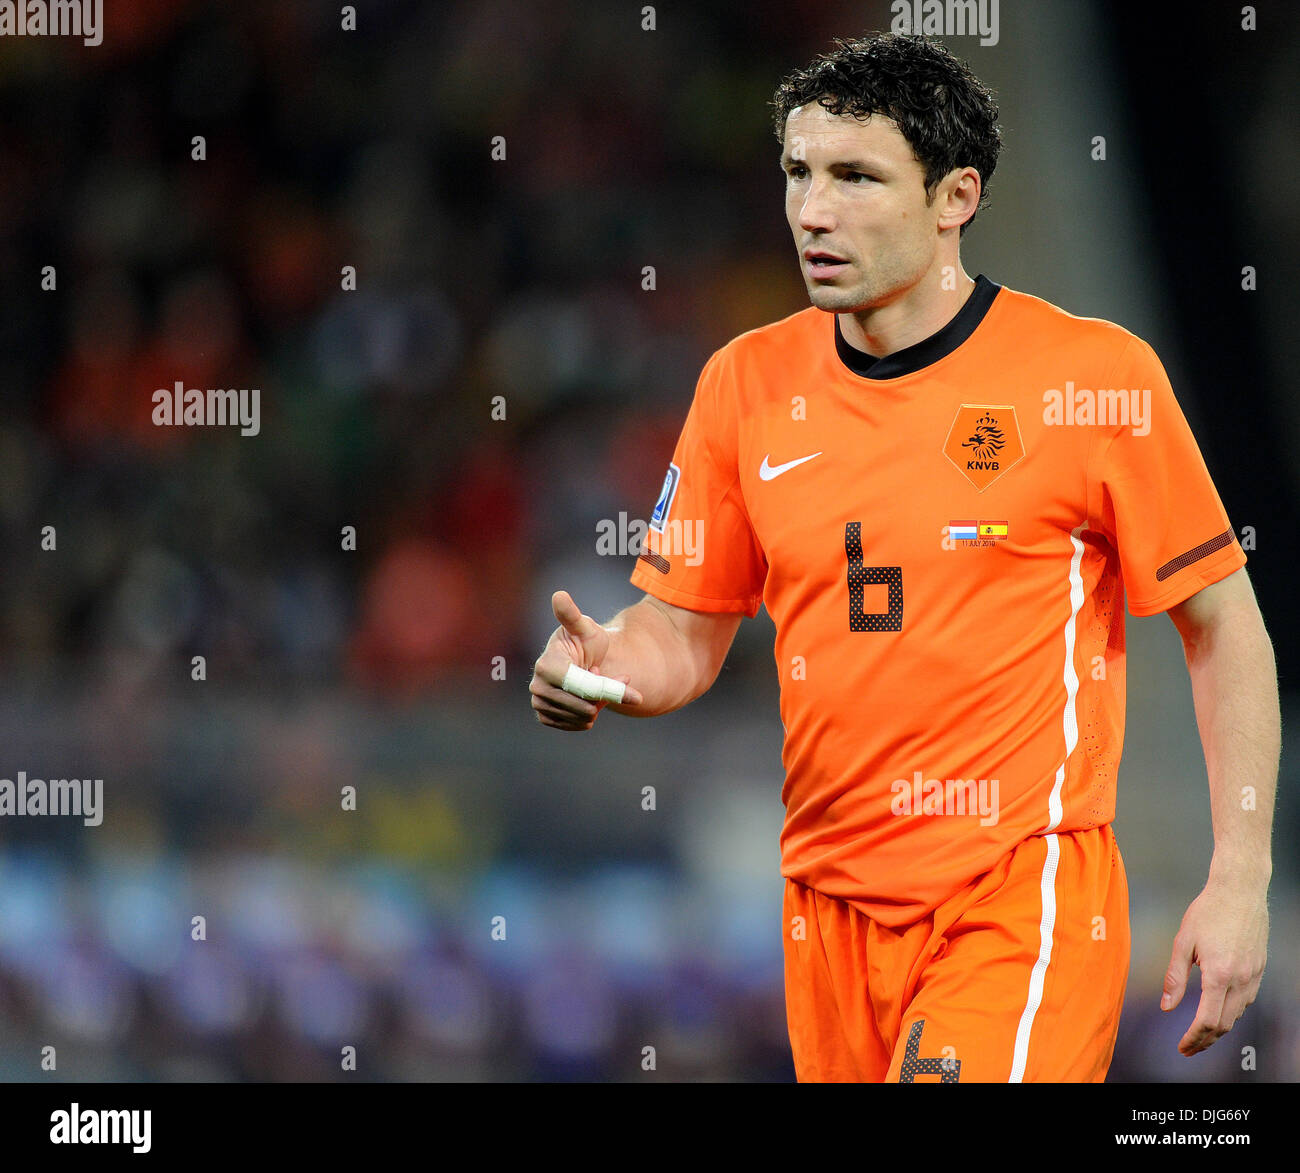 July 11, 2010 - Johannesburg, South Africa - Mark Van Bommel of Netherlands  gestures during the 2010 FIFA World Cup Final soccer match between  Netherlands and Spain at Soccer City Stadium on